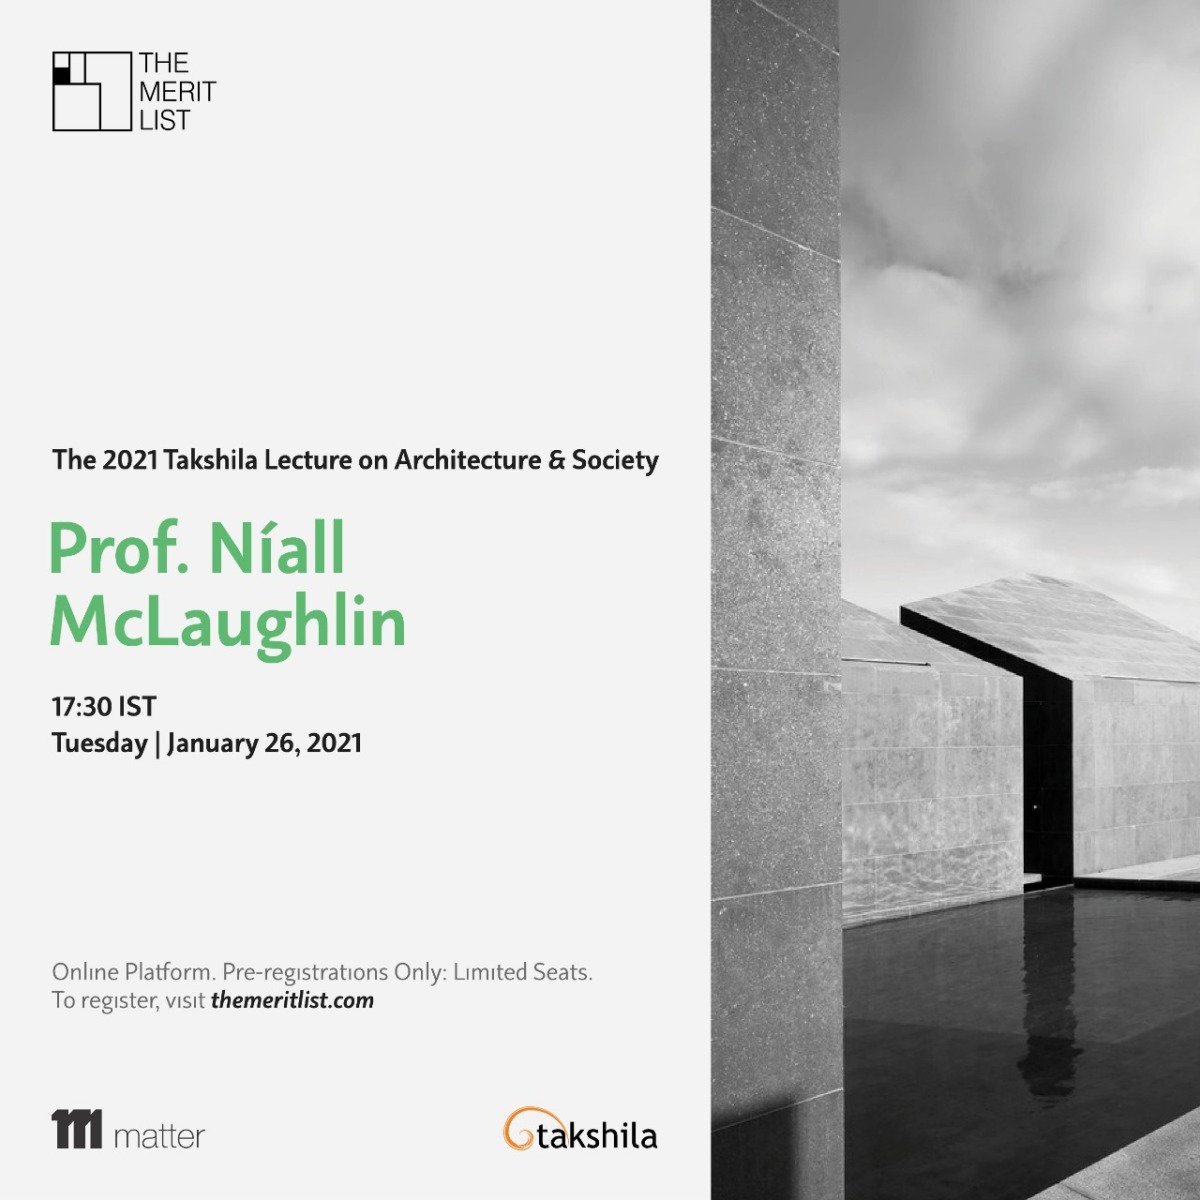 The 2021 Takshila Lecture on Architecture & Society: Níall McLaughlin